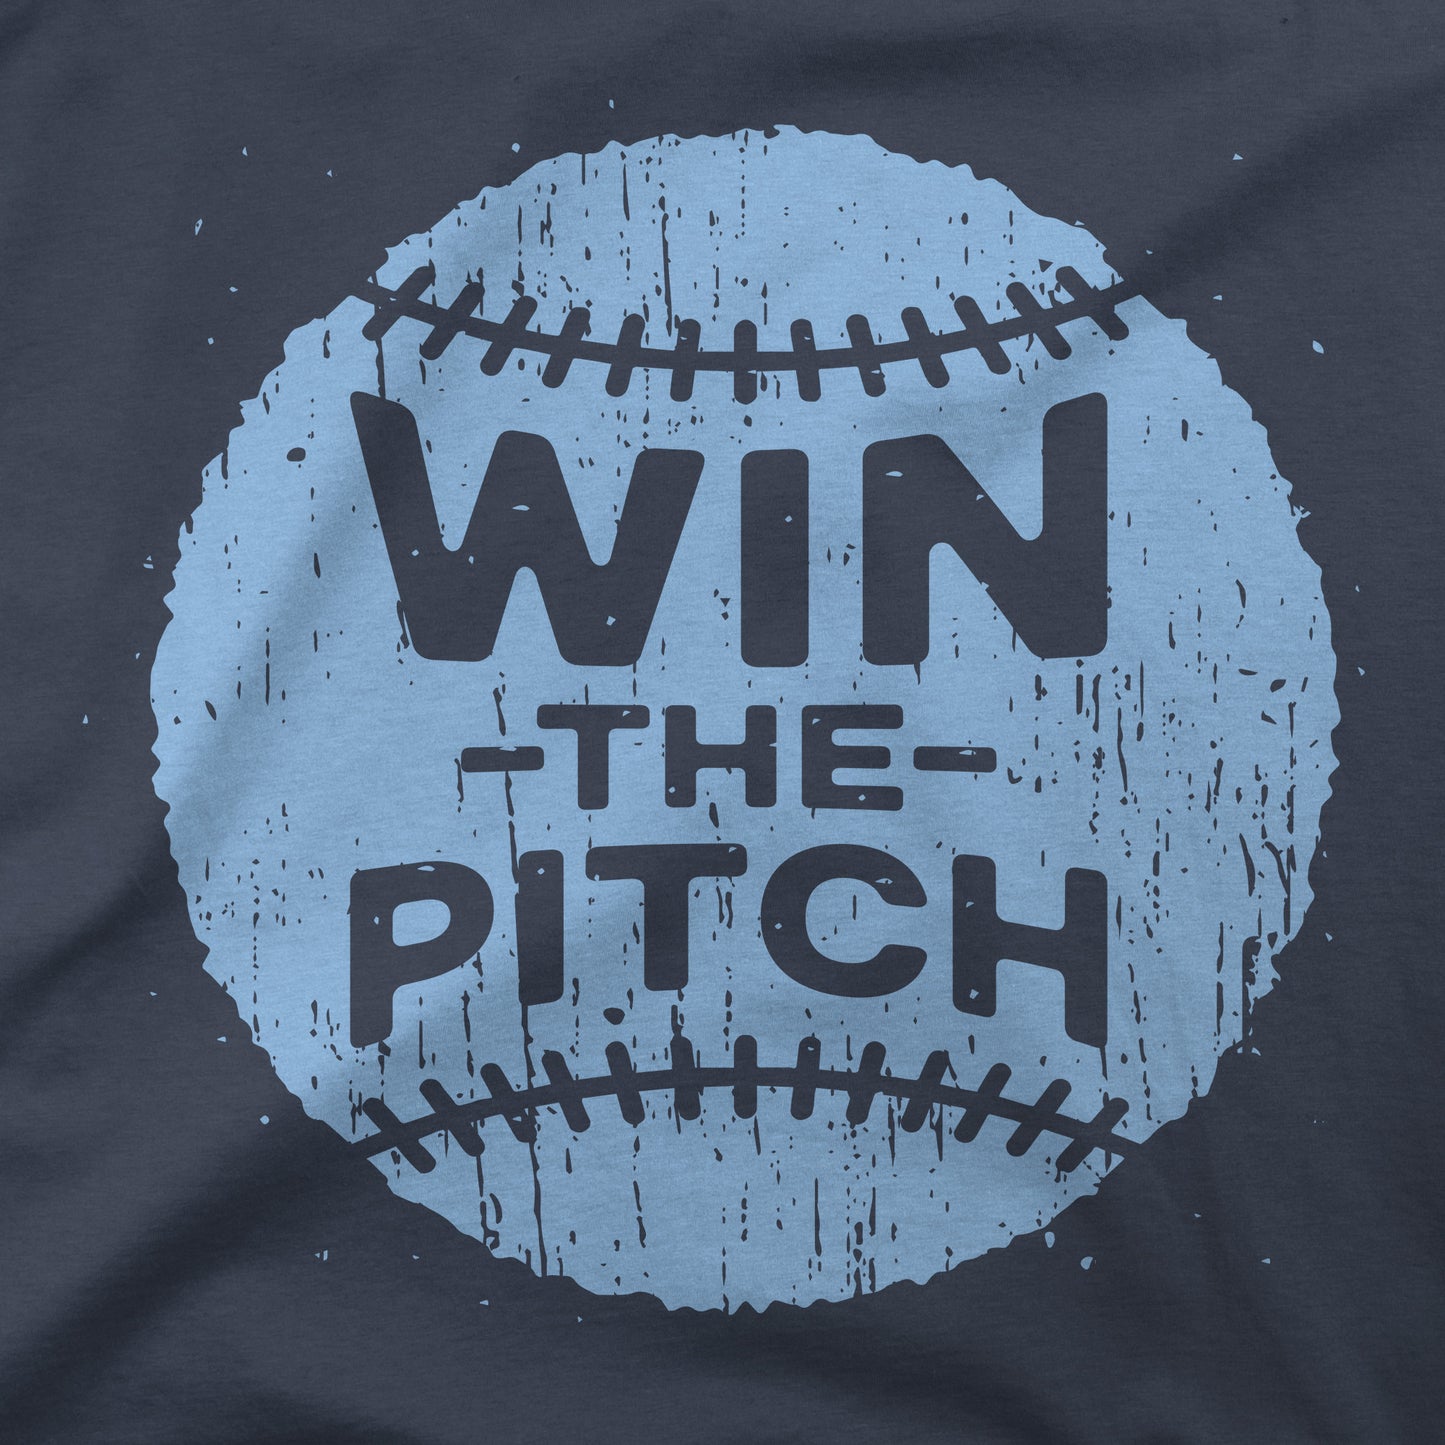 Win The Pitch | Tampa Bay | T-Shirt